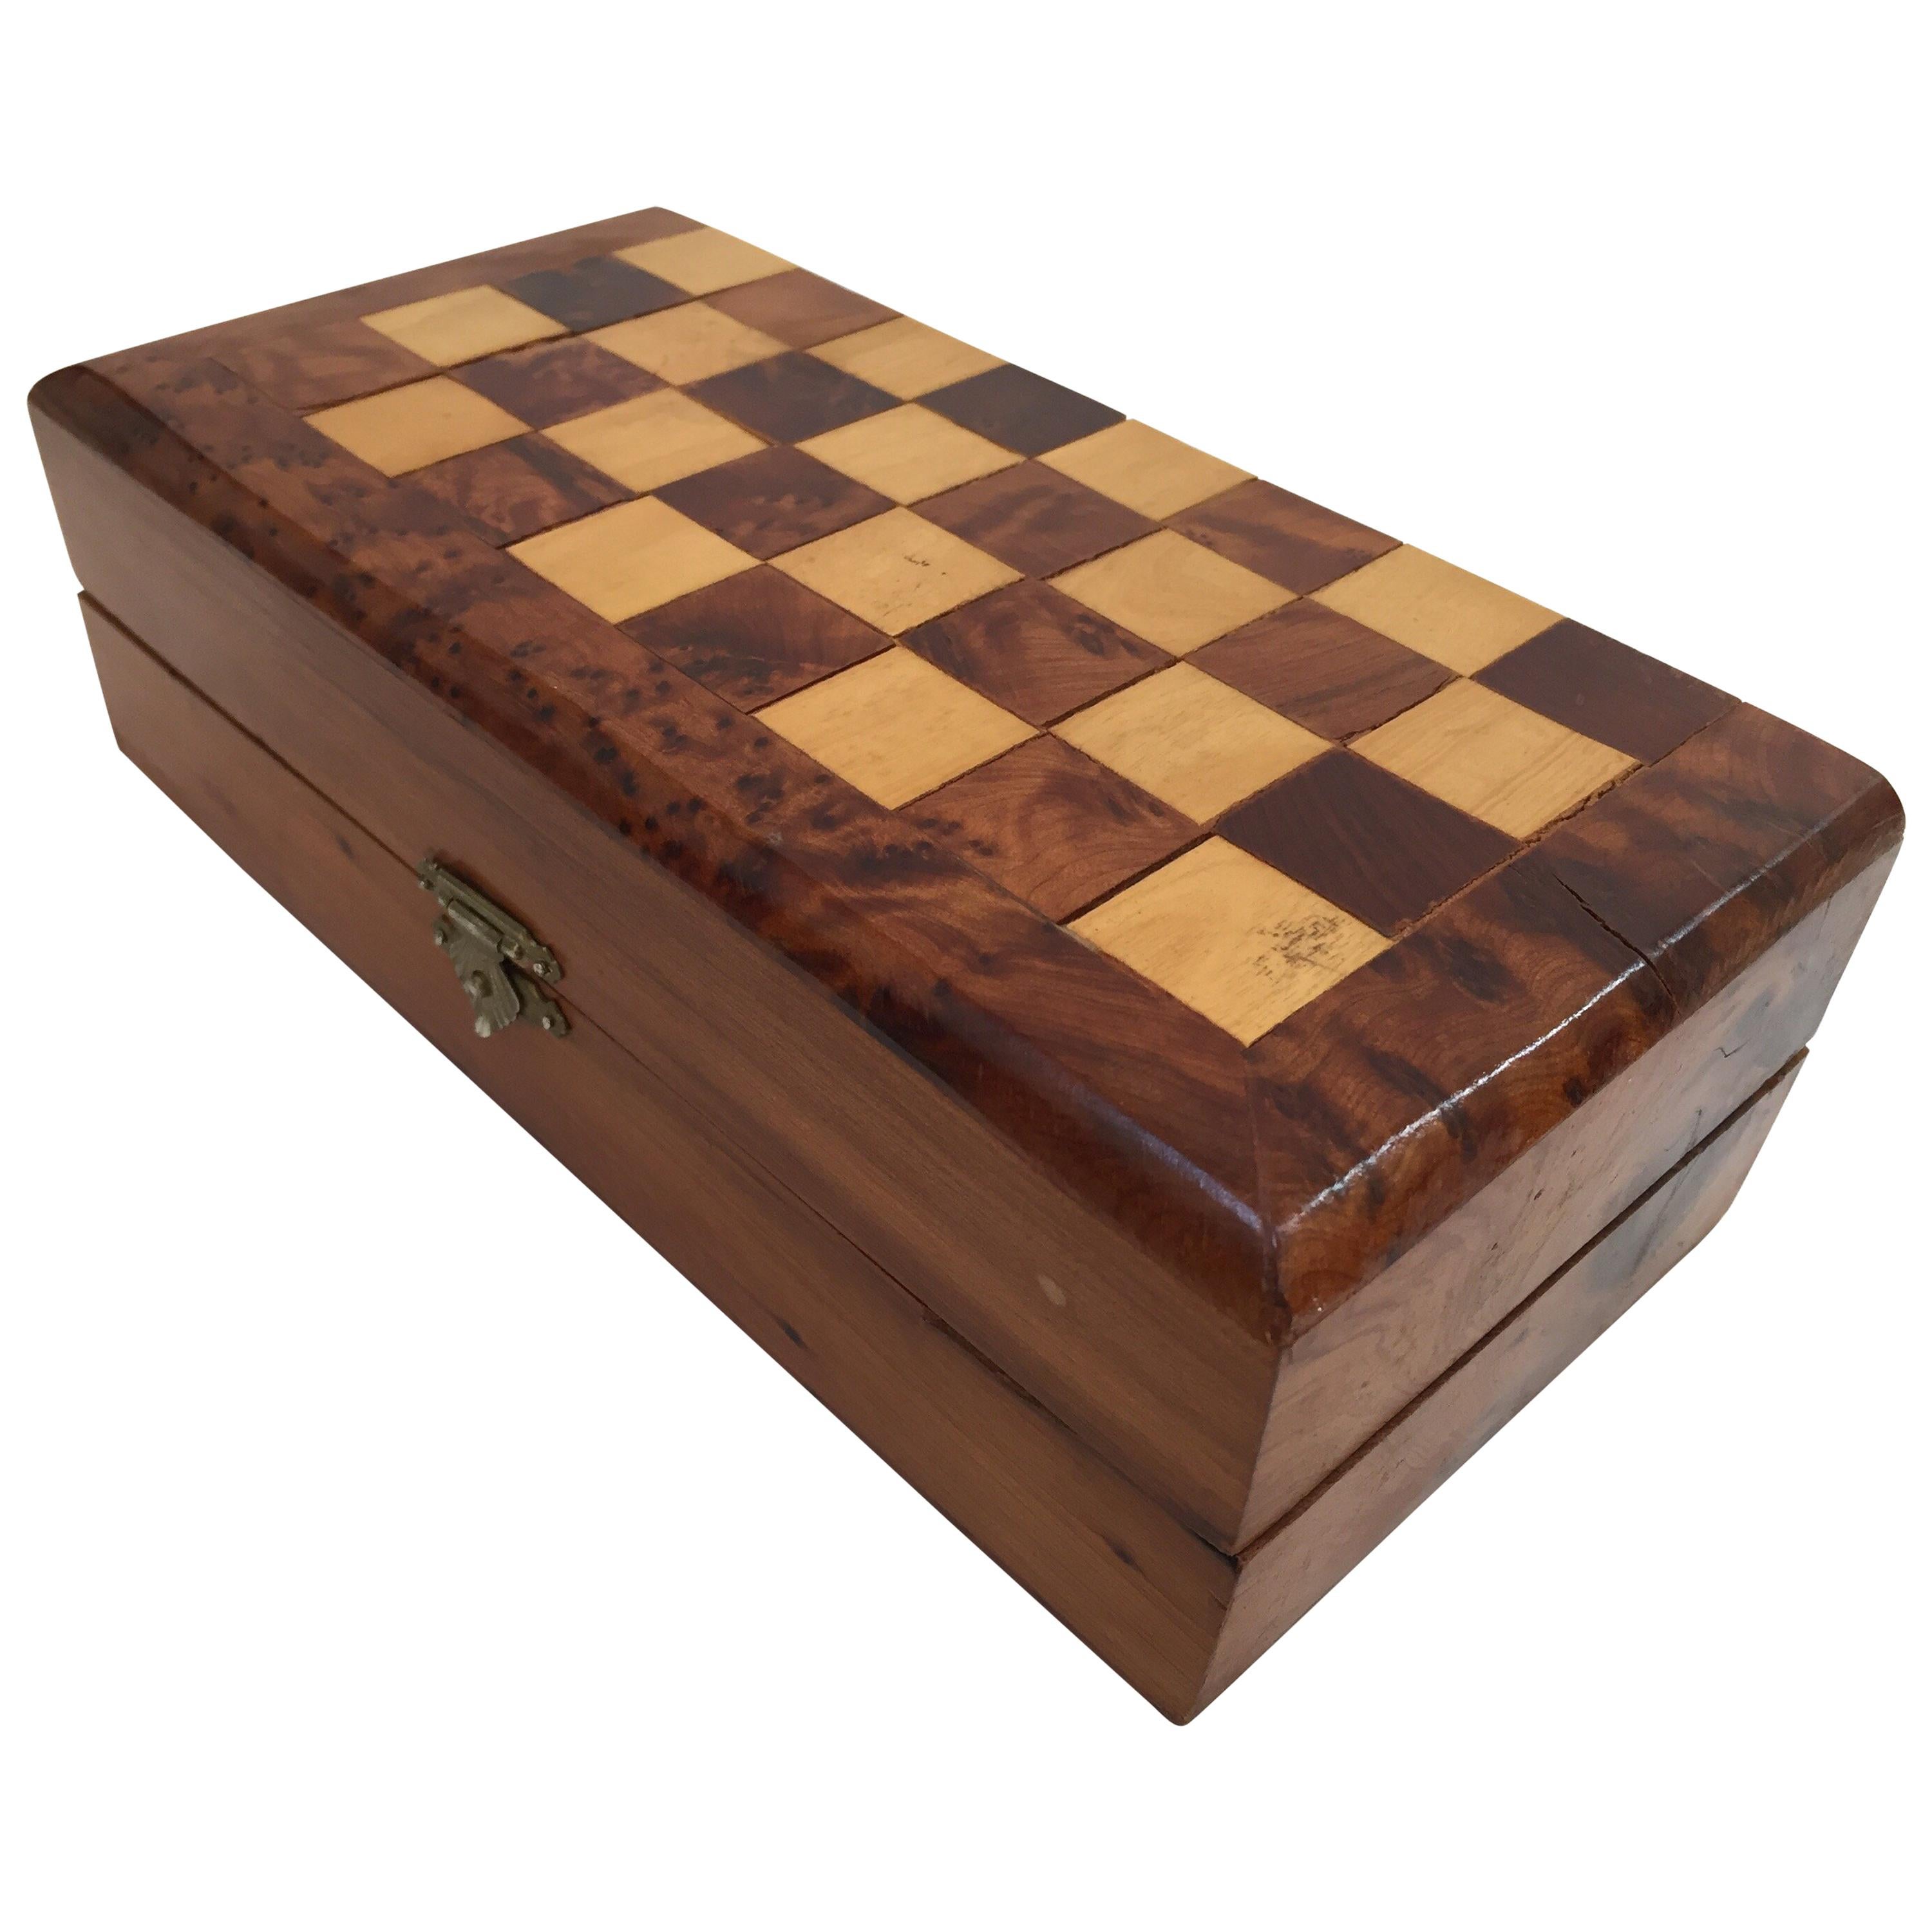 Moroccan Handcrafted Thuya Wood Box with Backgammon and Chess Set Game